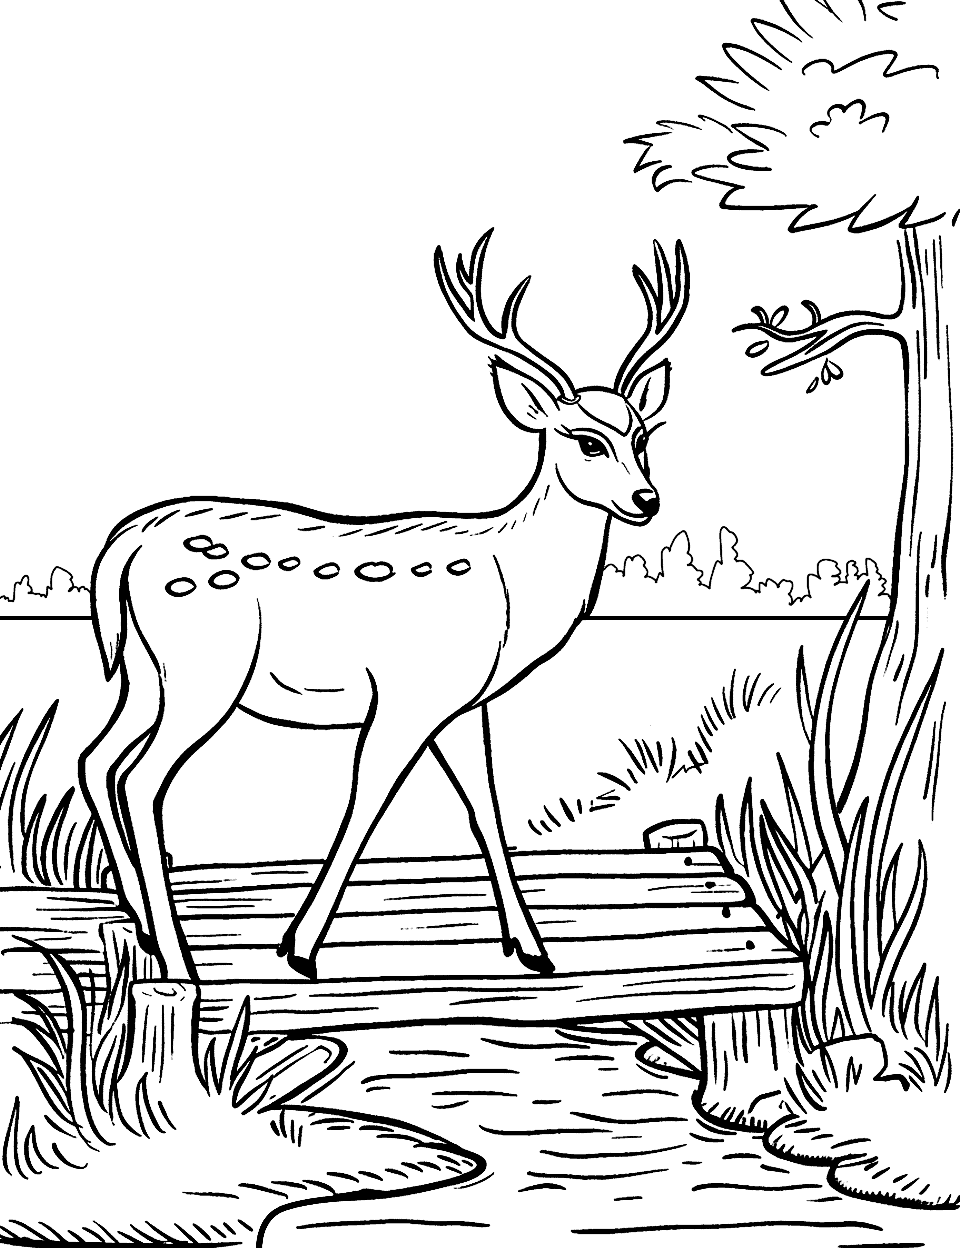 Deer Crossing a Wooden Bridge Coloring Page - A deer cautiously crossing a small wooden bridge over a stream.